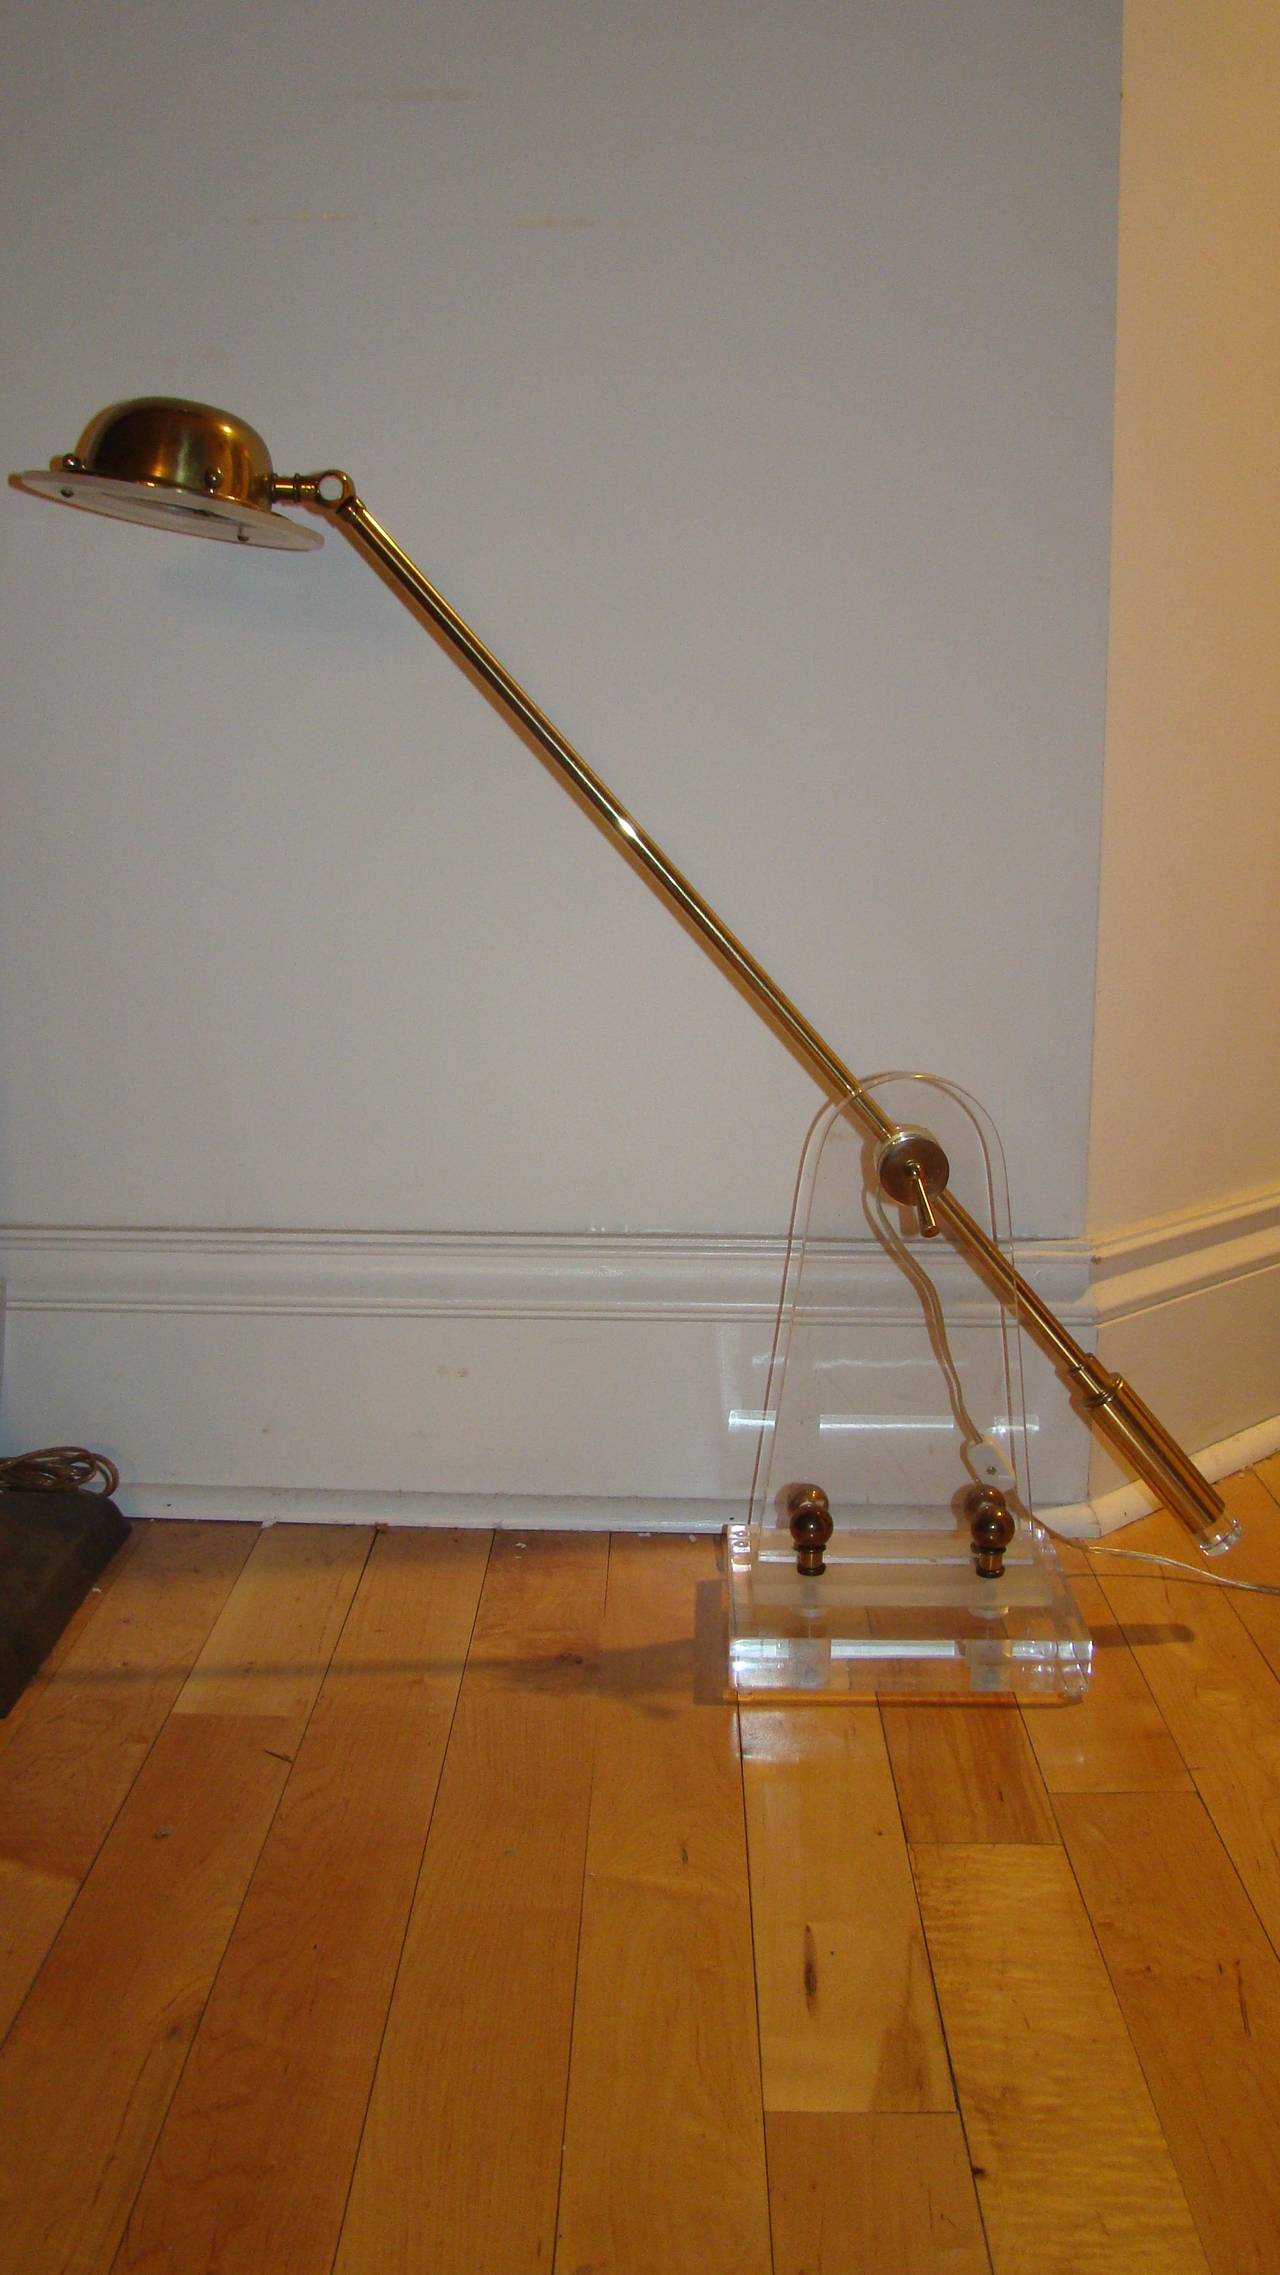 Terrific Mid-Century Lucite and brass desk lamp. This beautiful design is comprised of a crystal clear Lucite base with adjustable brass and Lucite arm. The lamp takes a halogen bulb and has a metal transformer switch. Truly a beautiful design in